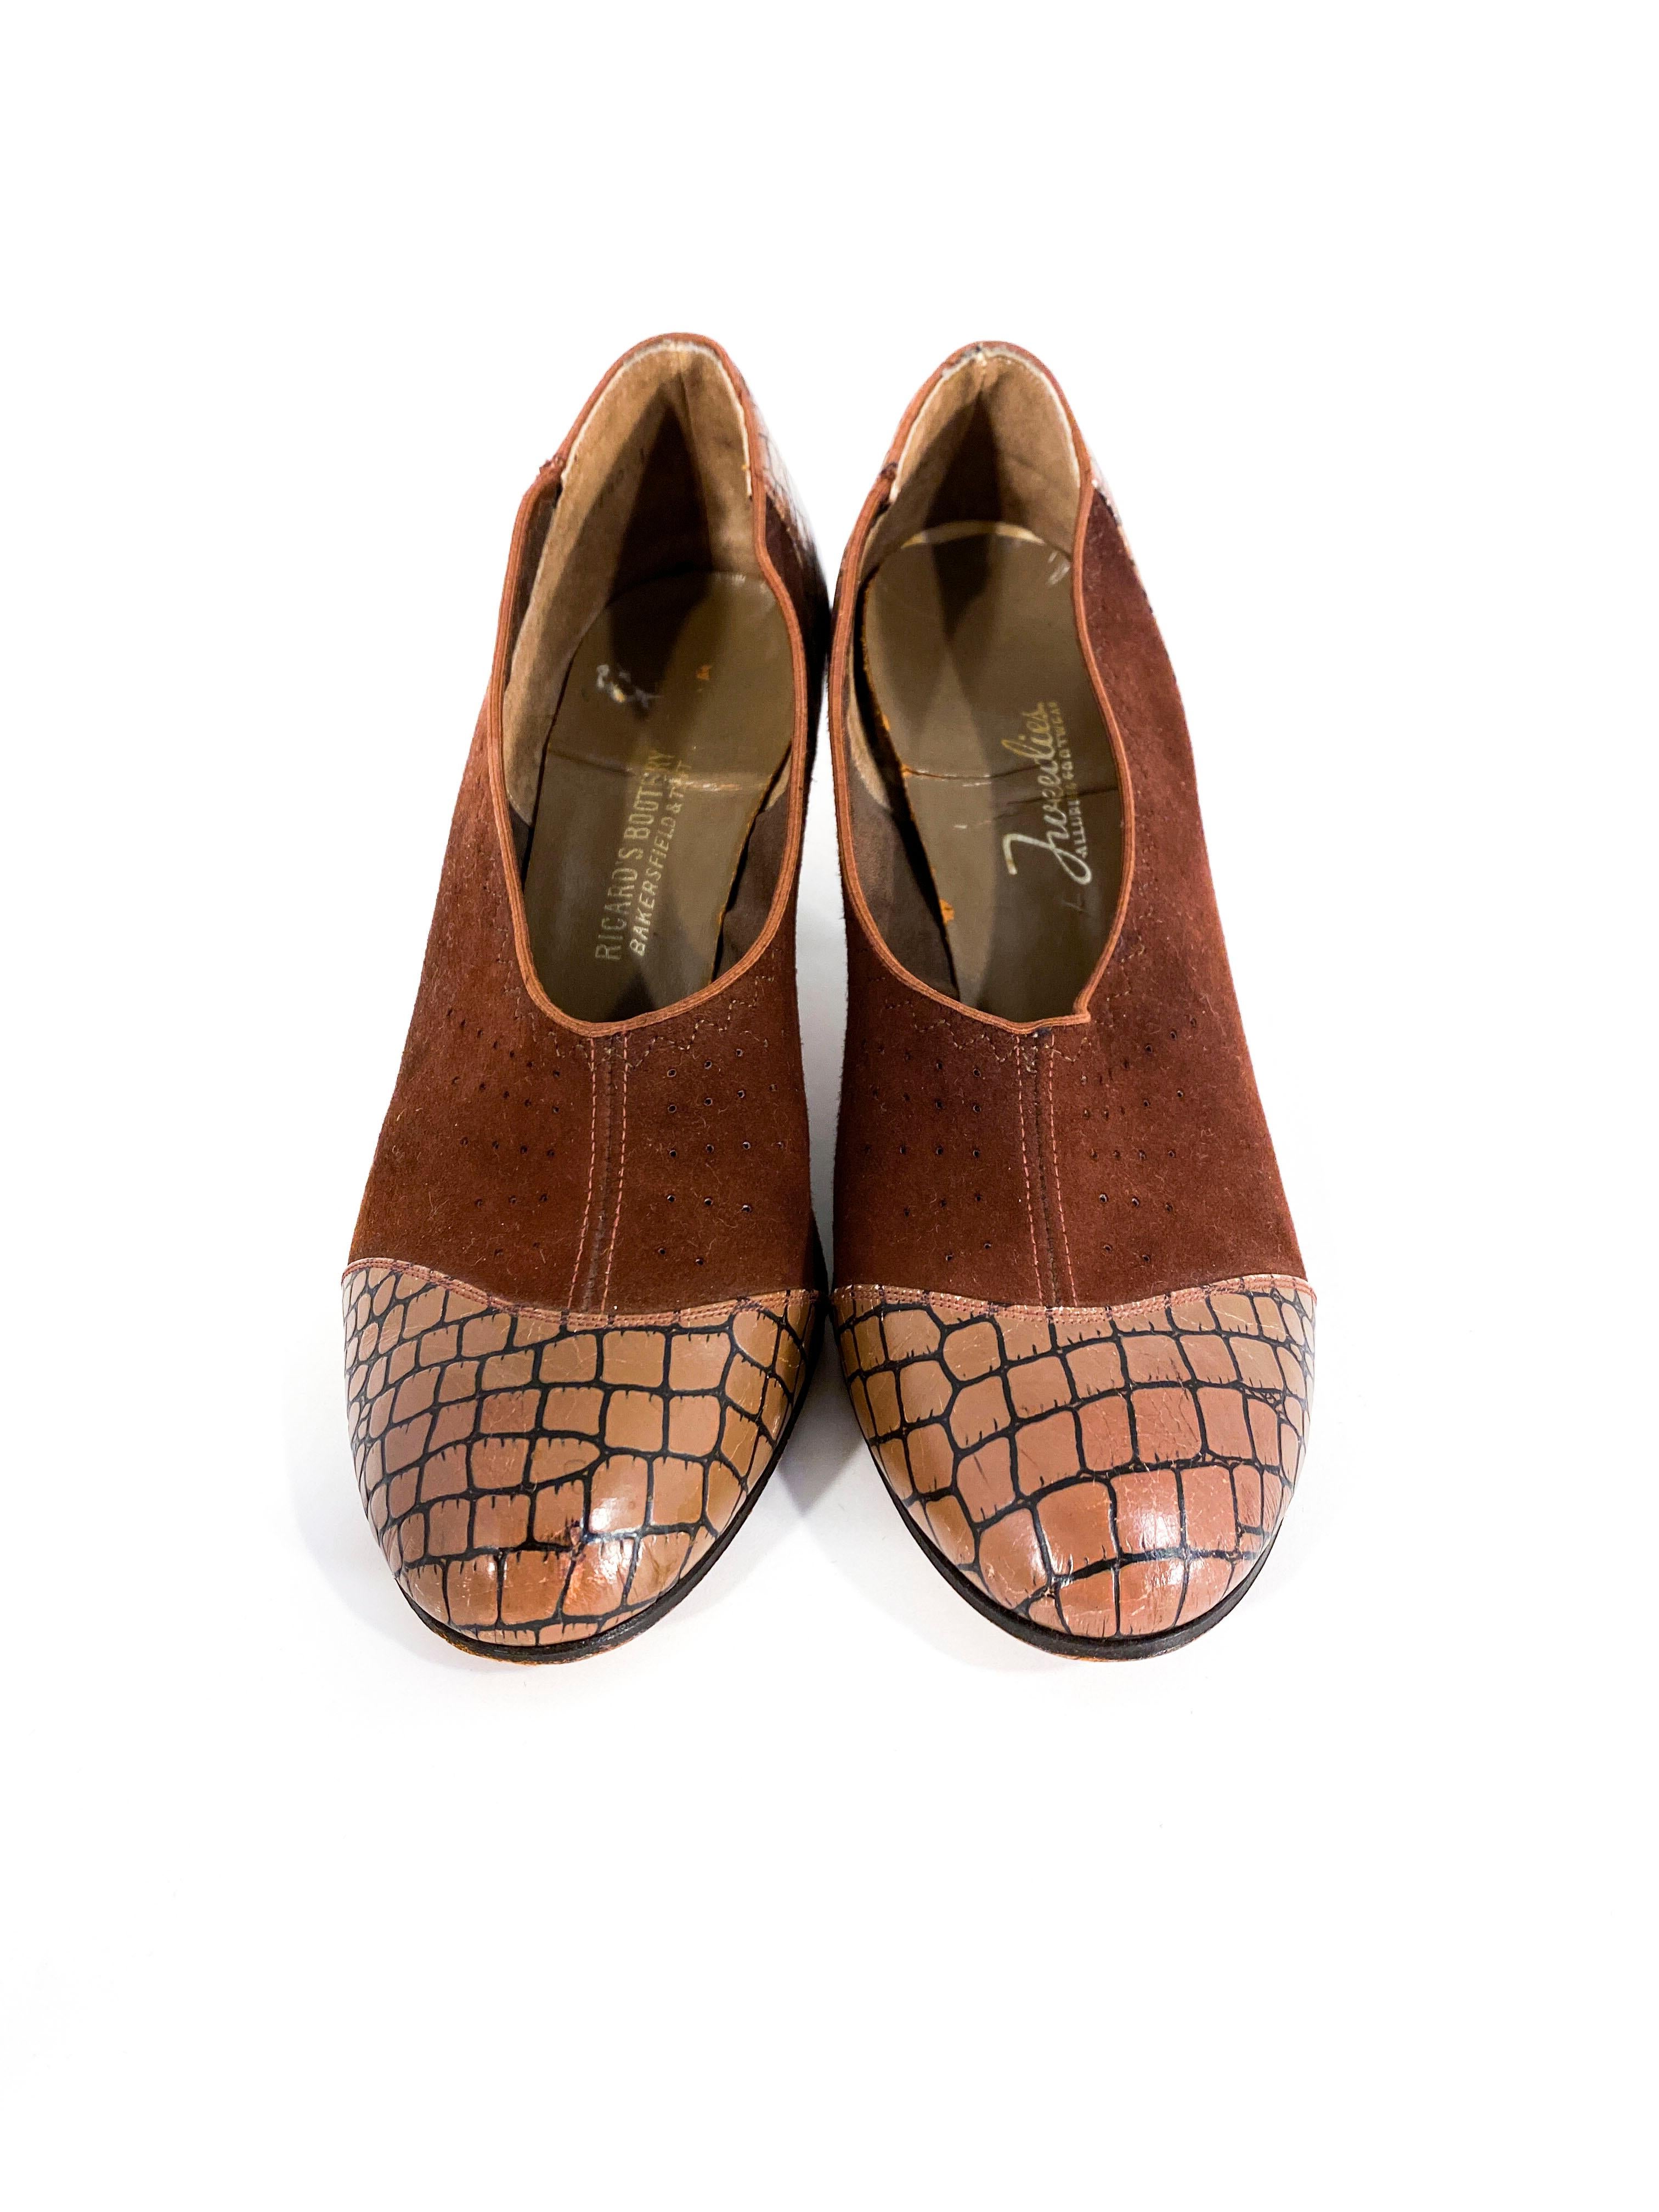 1930 brown suede with faux alligator pattered accents. The Suede has a zig-zag top-stitch and a piercing pattern. Leather soles.